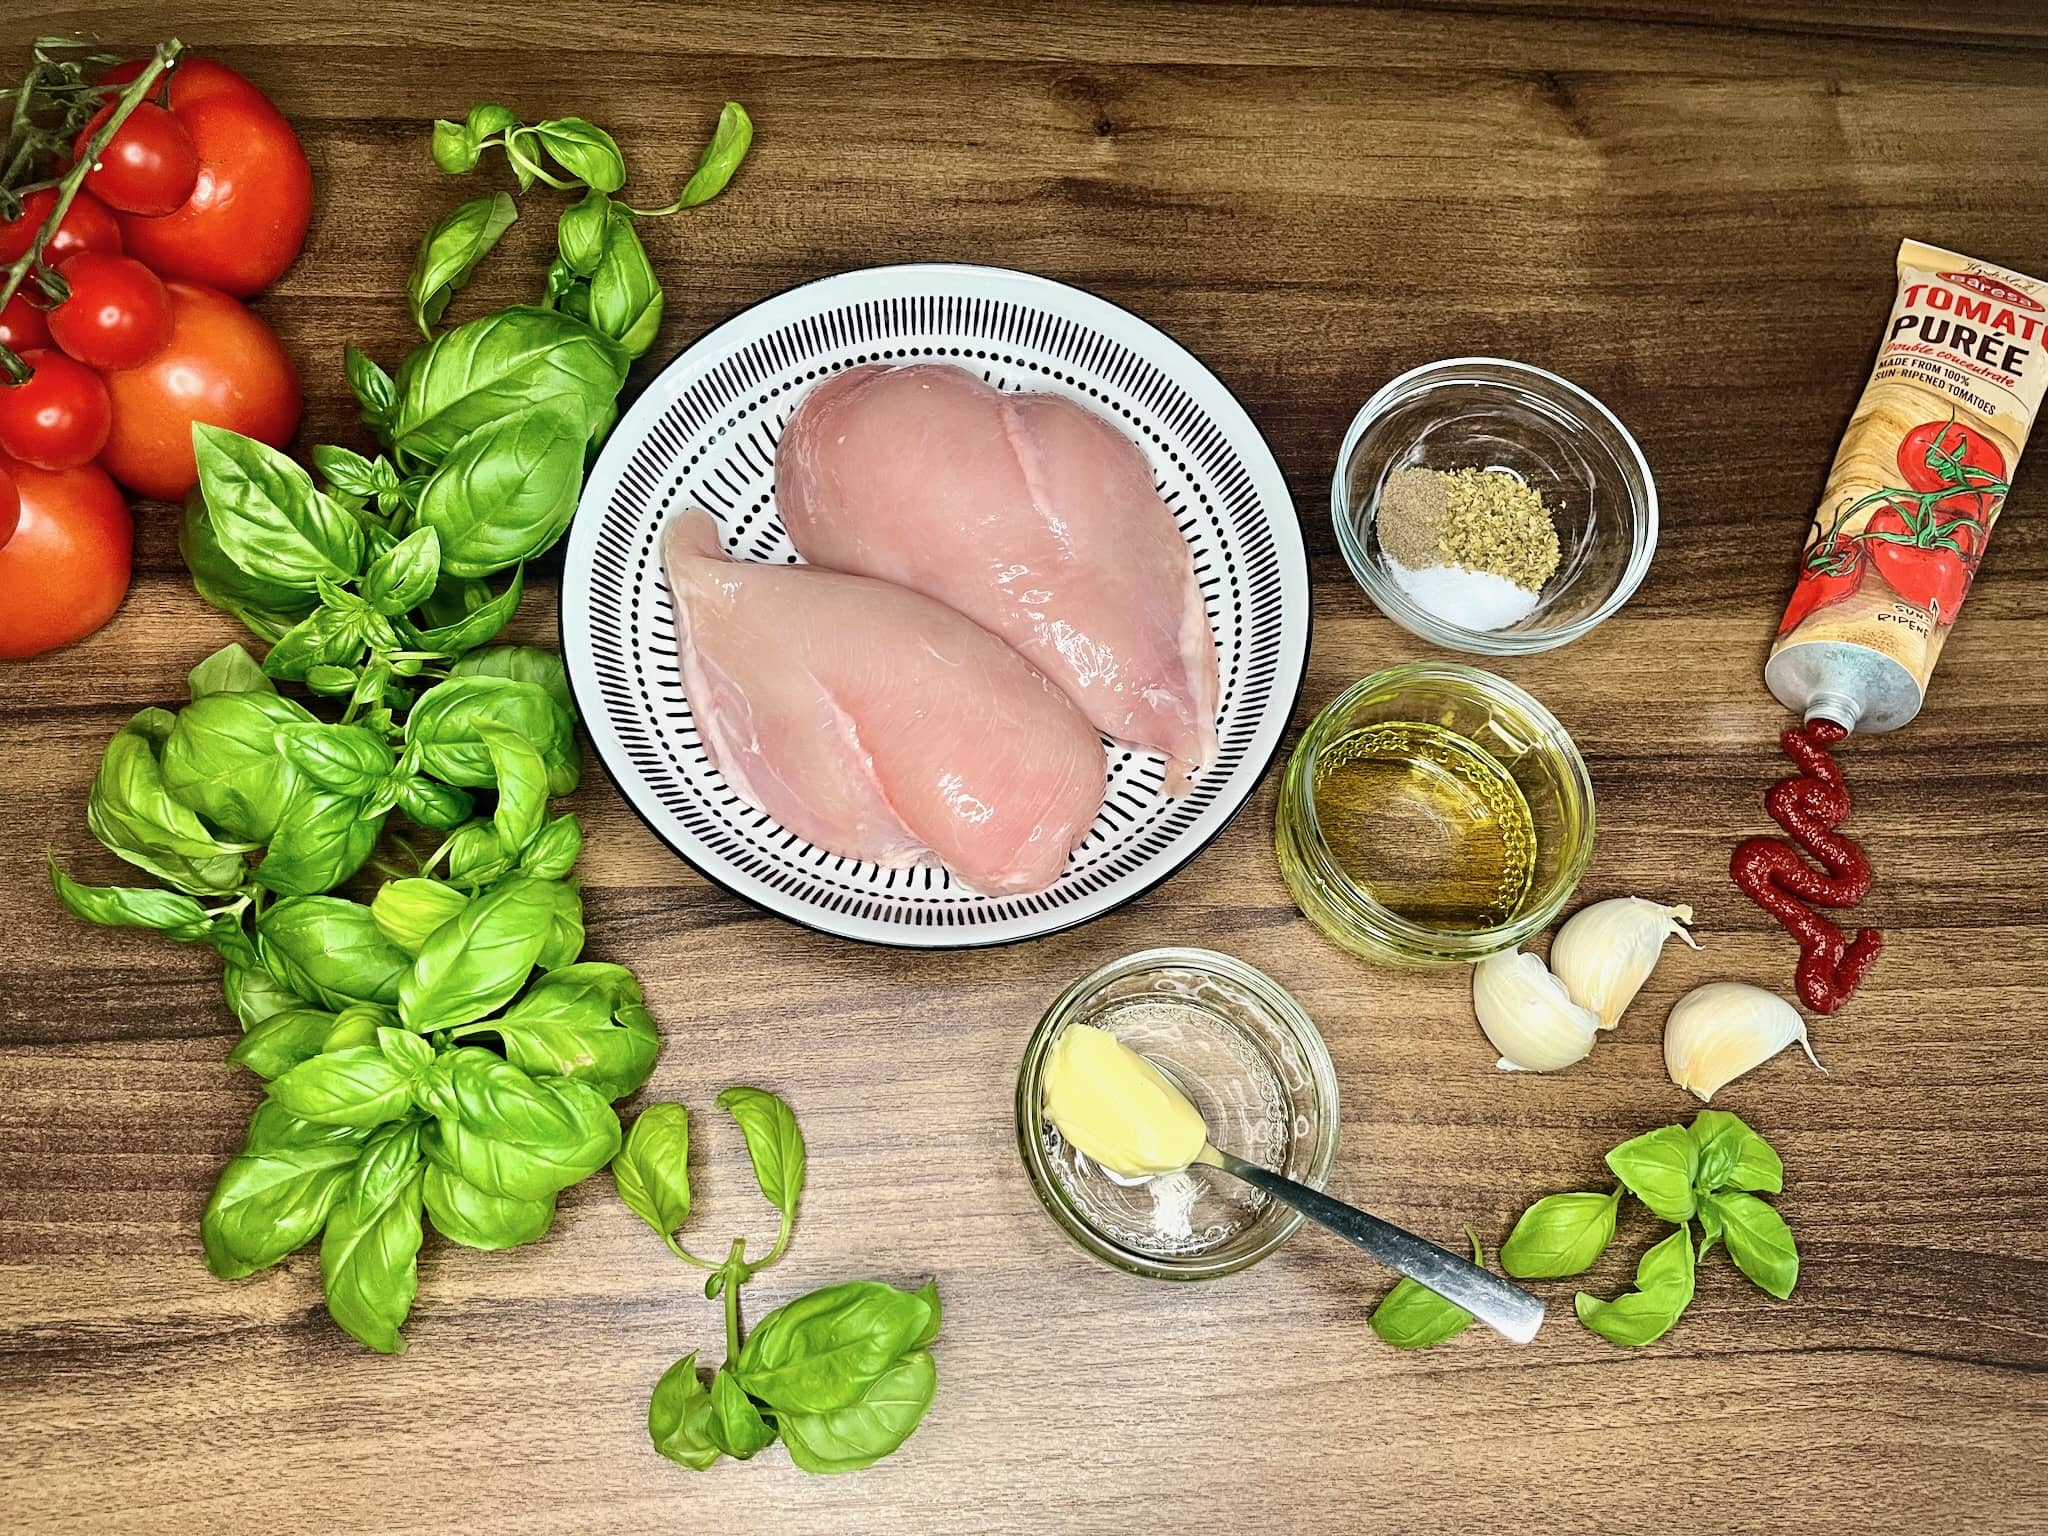 All ingredients are laid out on the tabletop, ready to prepare Tomato and Basil Chicken